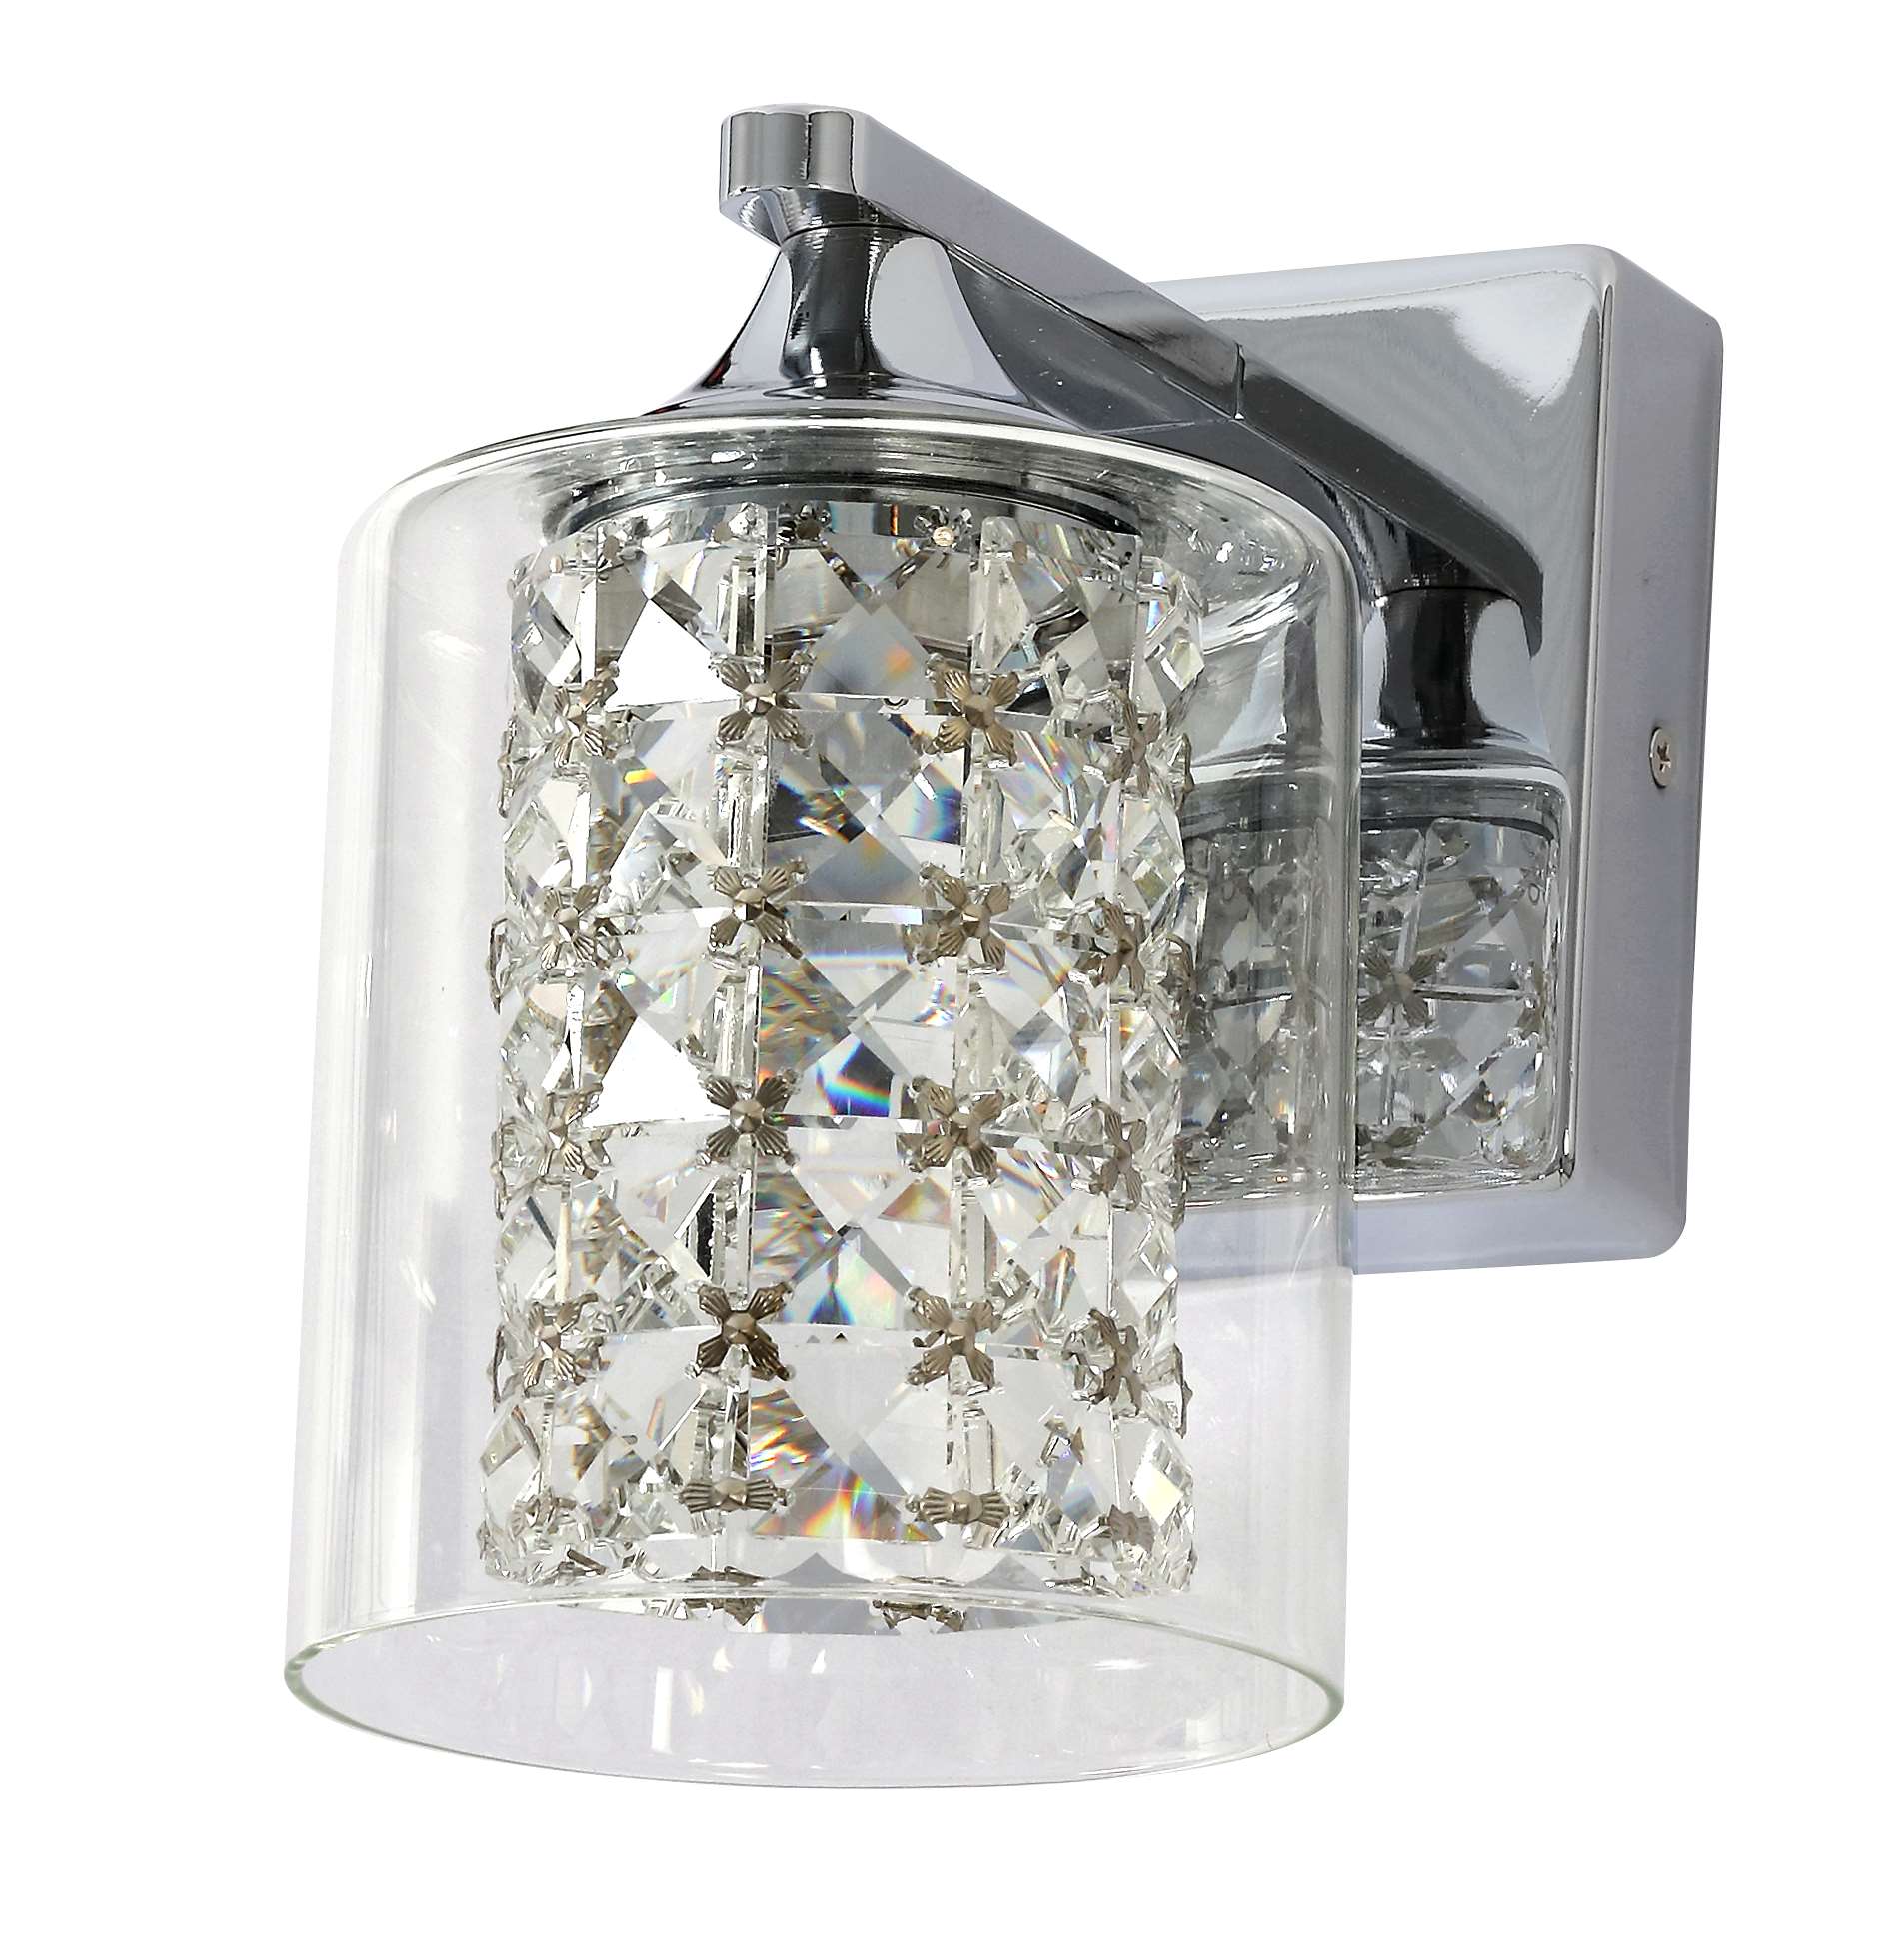 Wall Light Fixture Indoor Sconce Modern Contemporary Vanity Crystal Chrome Mini